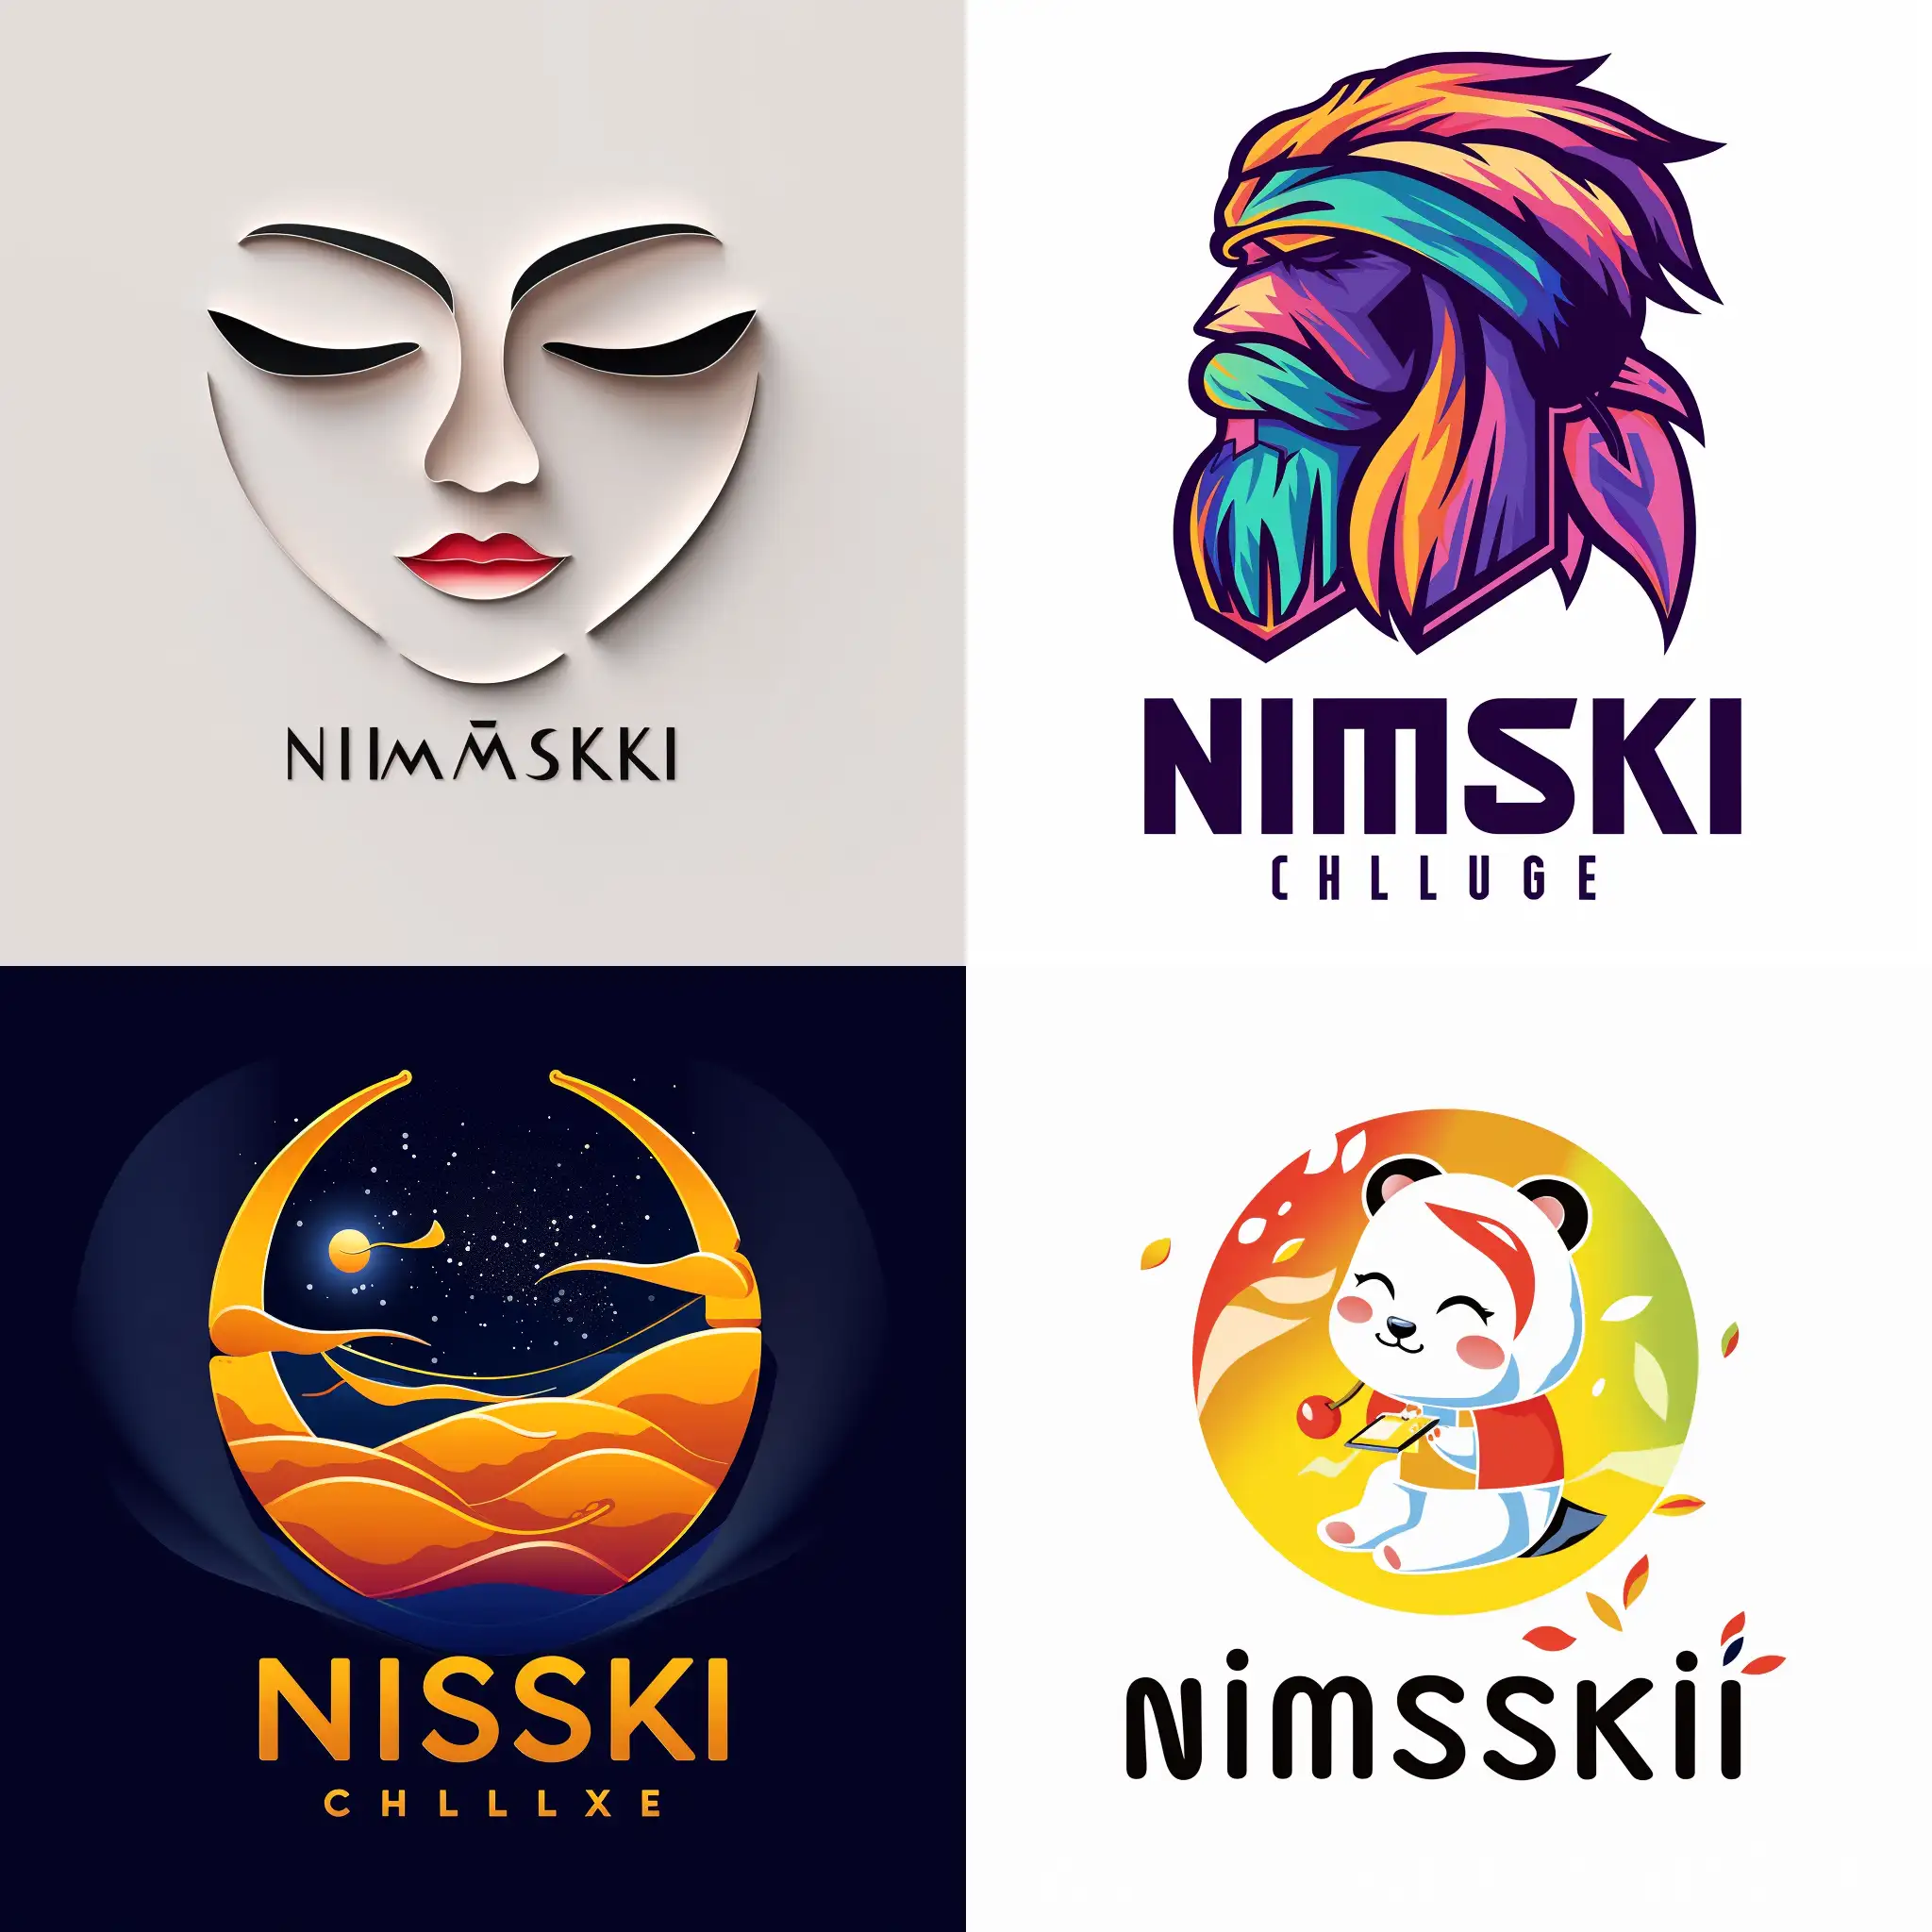 Nimaski-Challenge-Logo-Dynamic-Symmetry-and-Vibrant-Colors-in-a-Square-Format